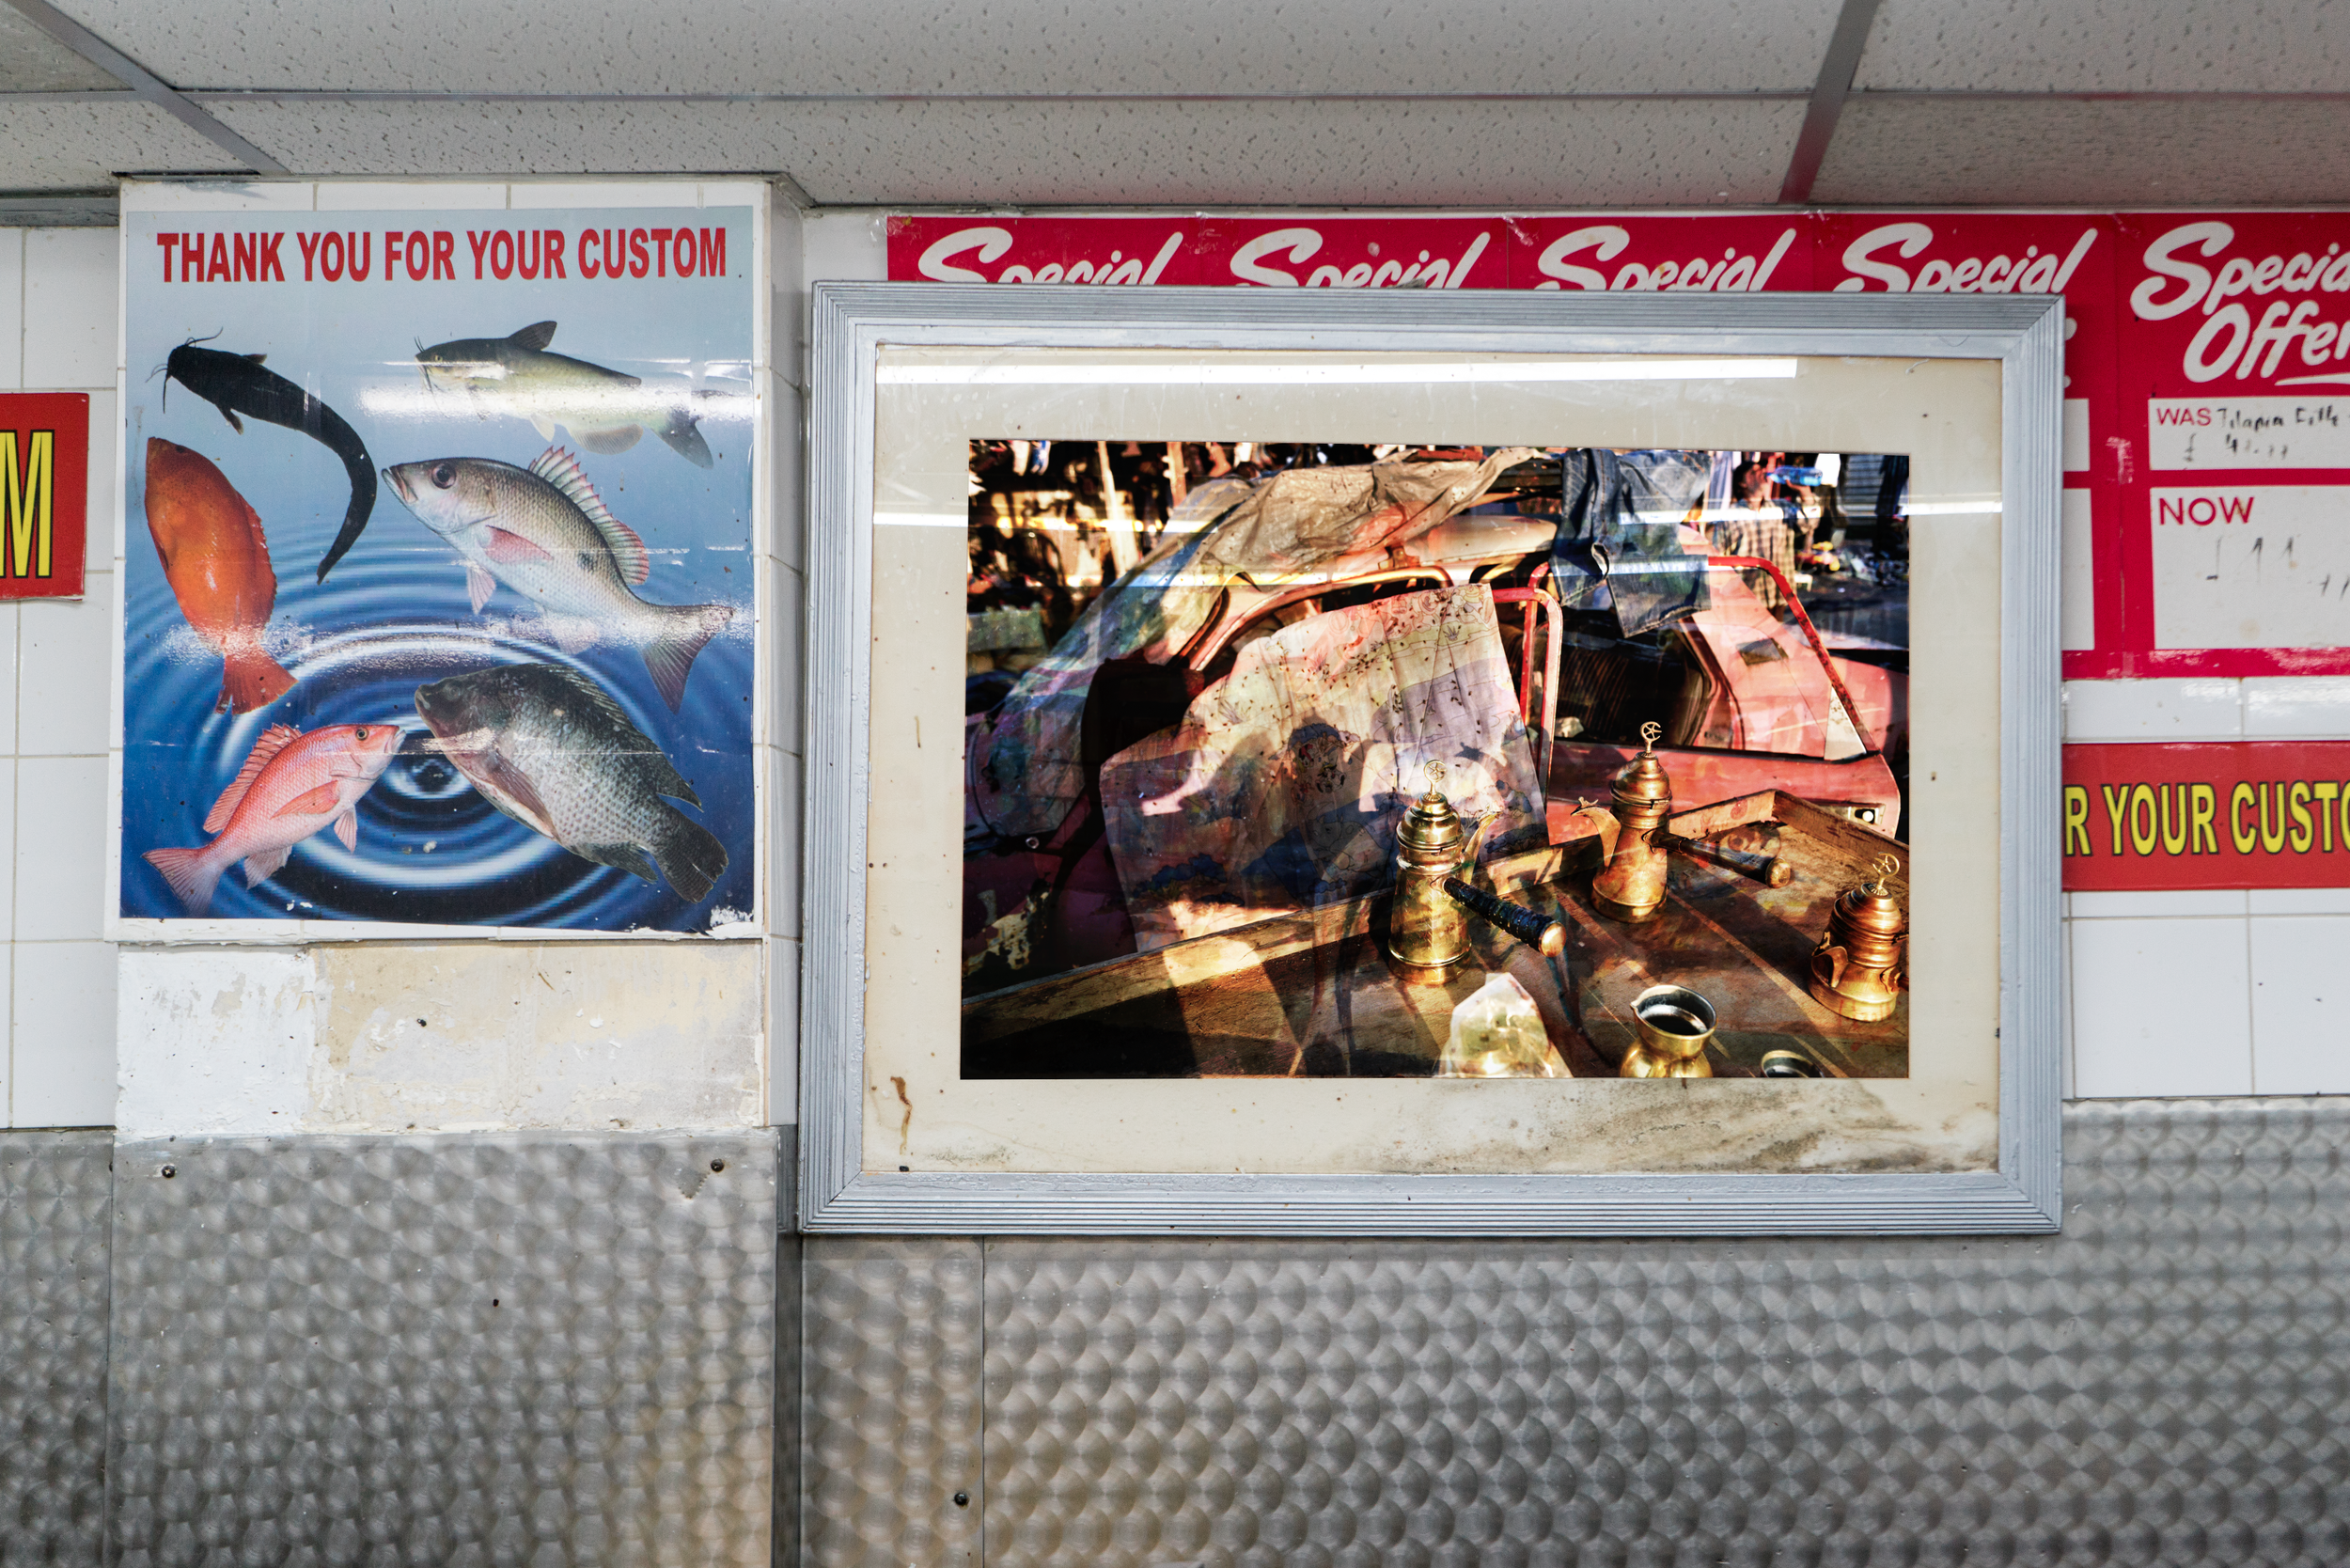  Photographed by Sophie Ellis and Madalena Botto. Installation of my photograph “Tradition Vanquishes Thirst,” inside a fish shop near Harlesden High Street Gallery.  